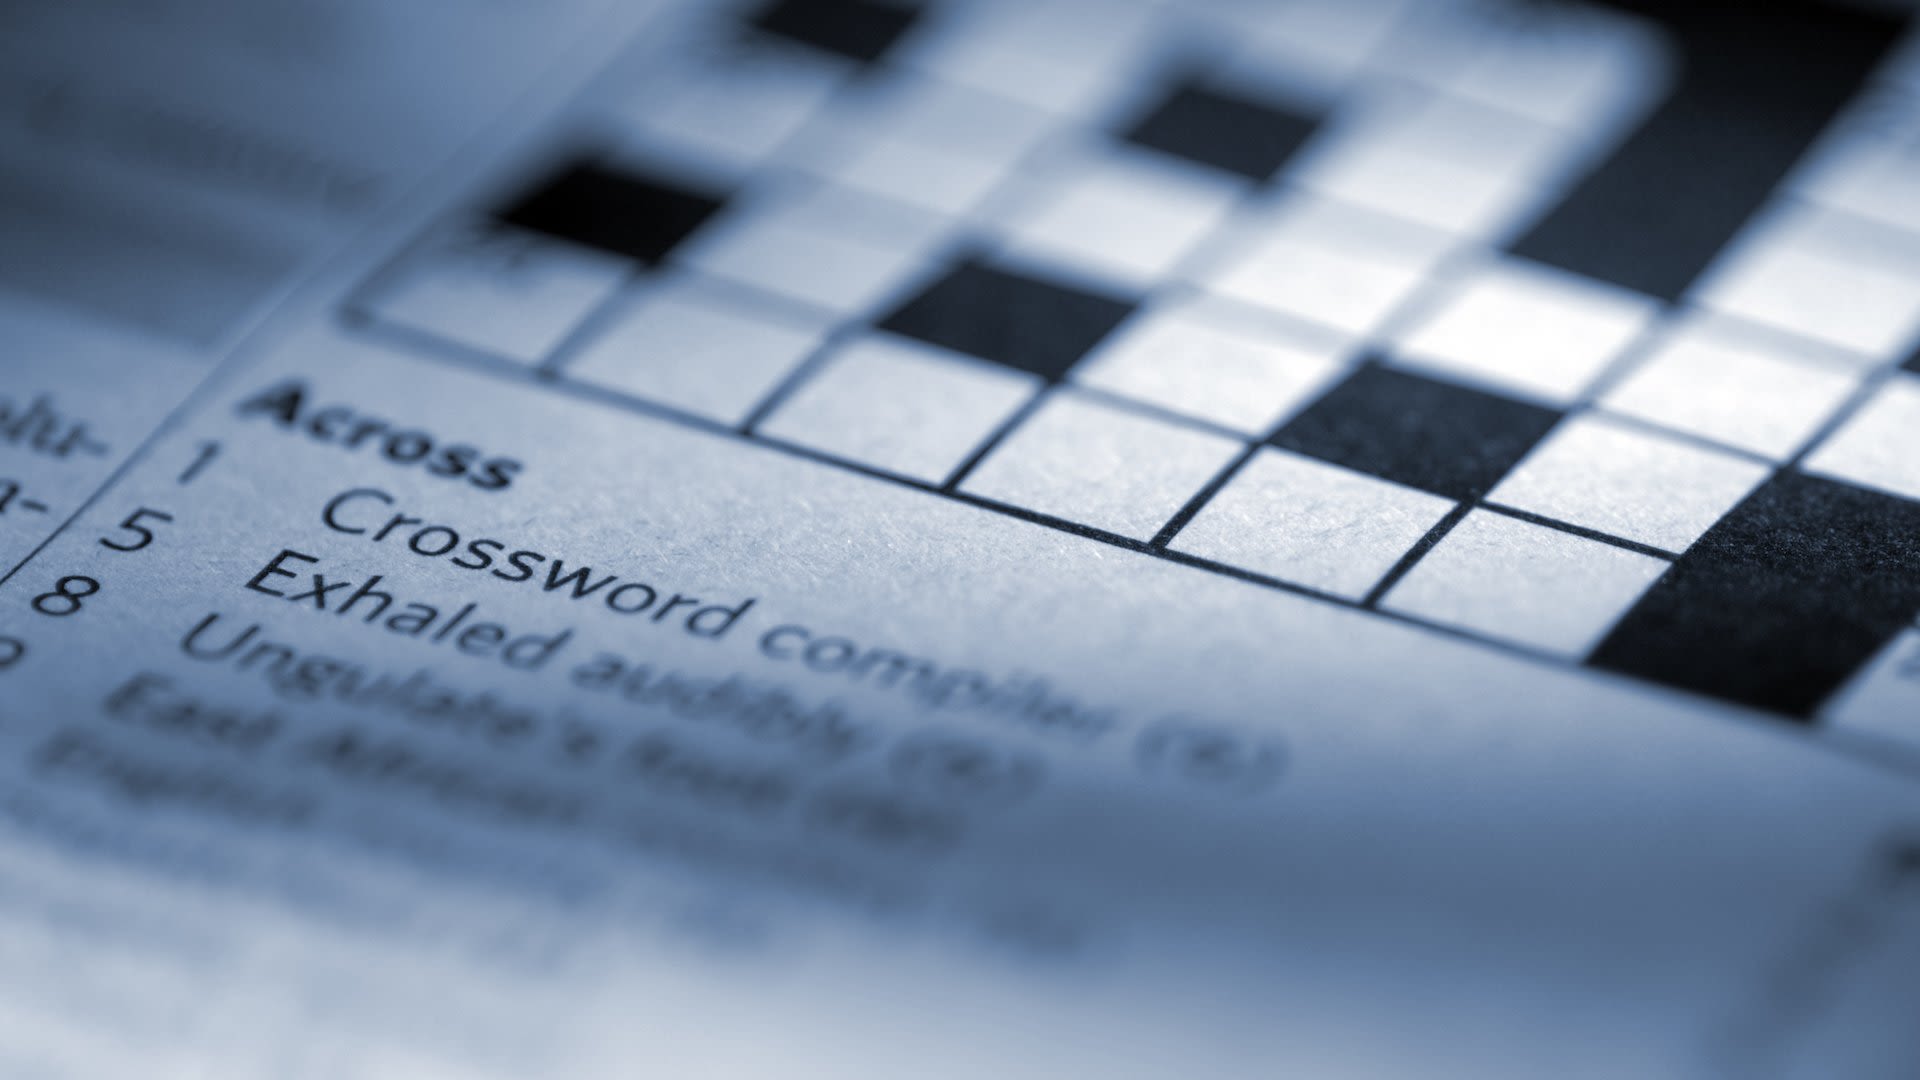 NYT's The Mini crossword answers for July 20